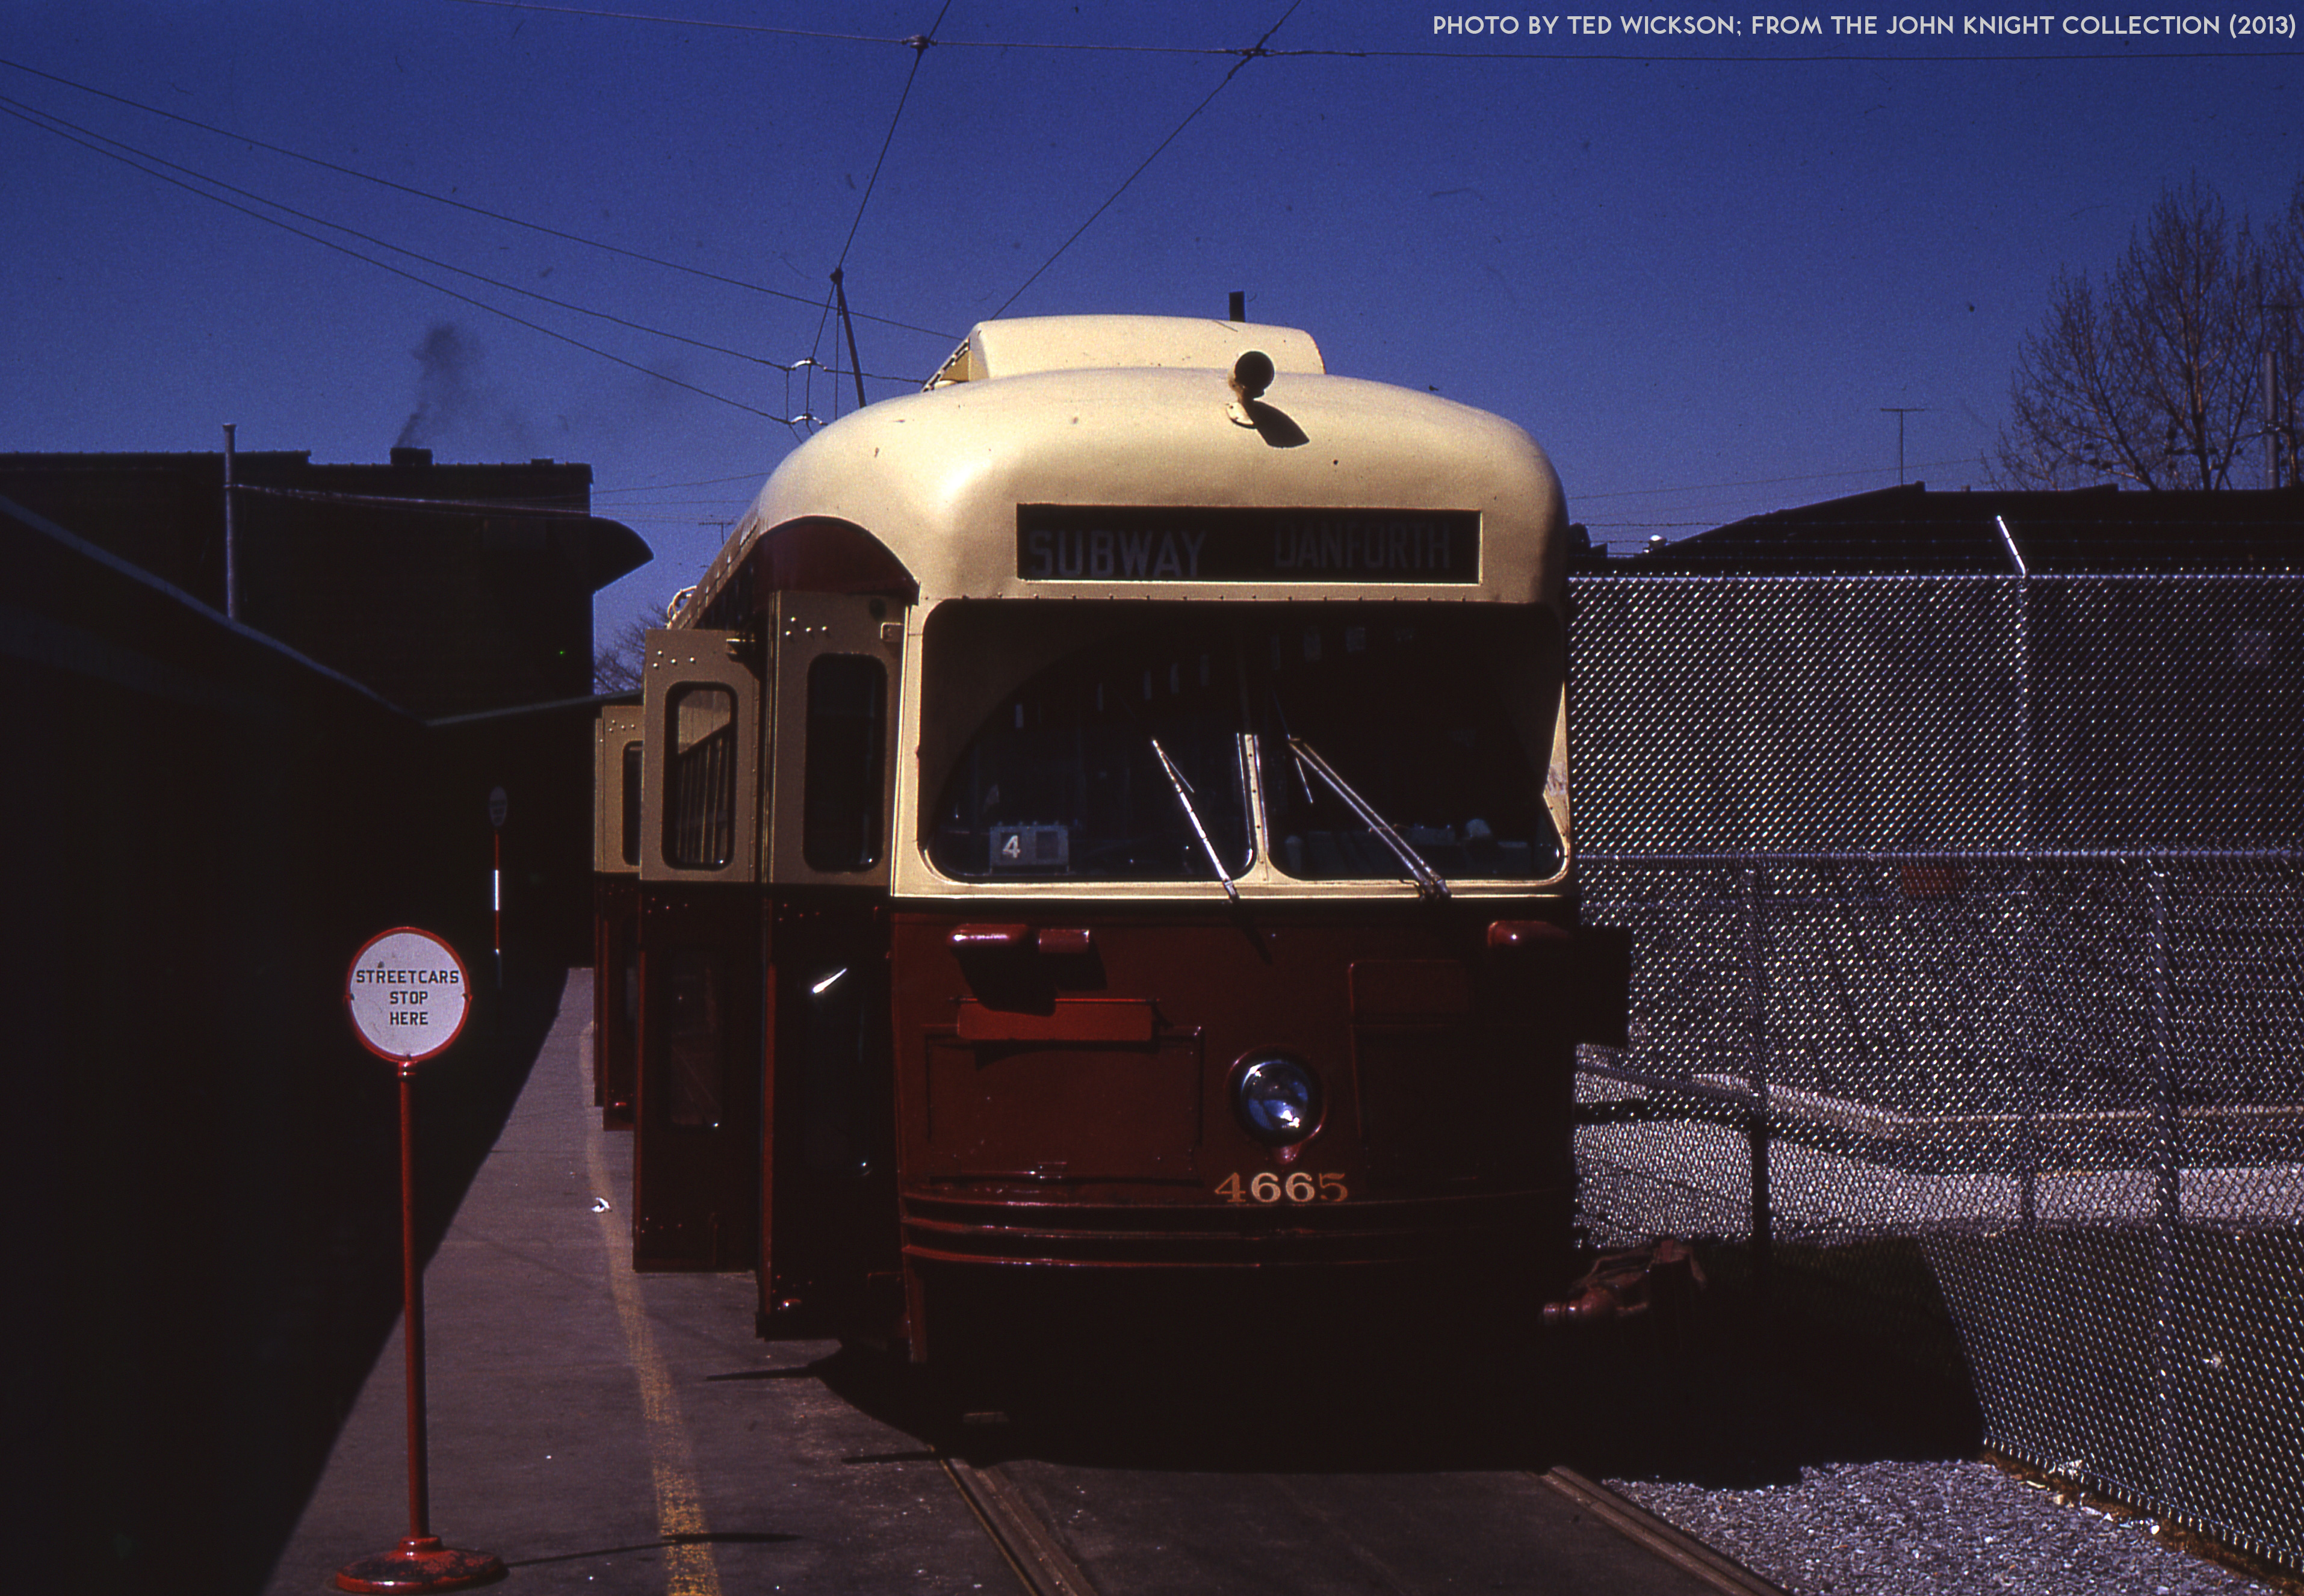 19660514 - Bloor - 4665 at Woodbine Station